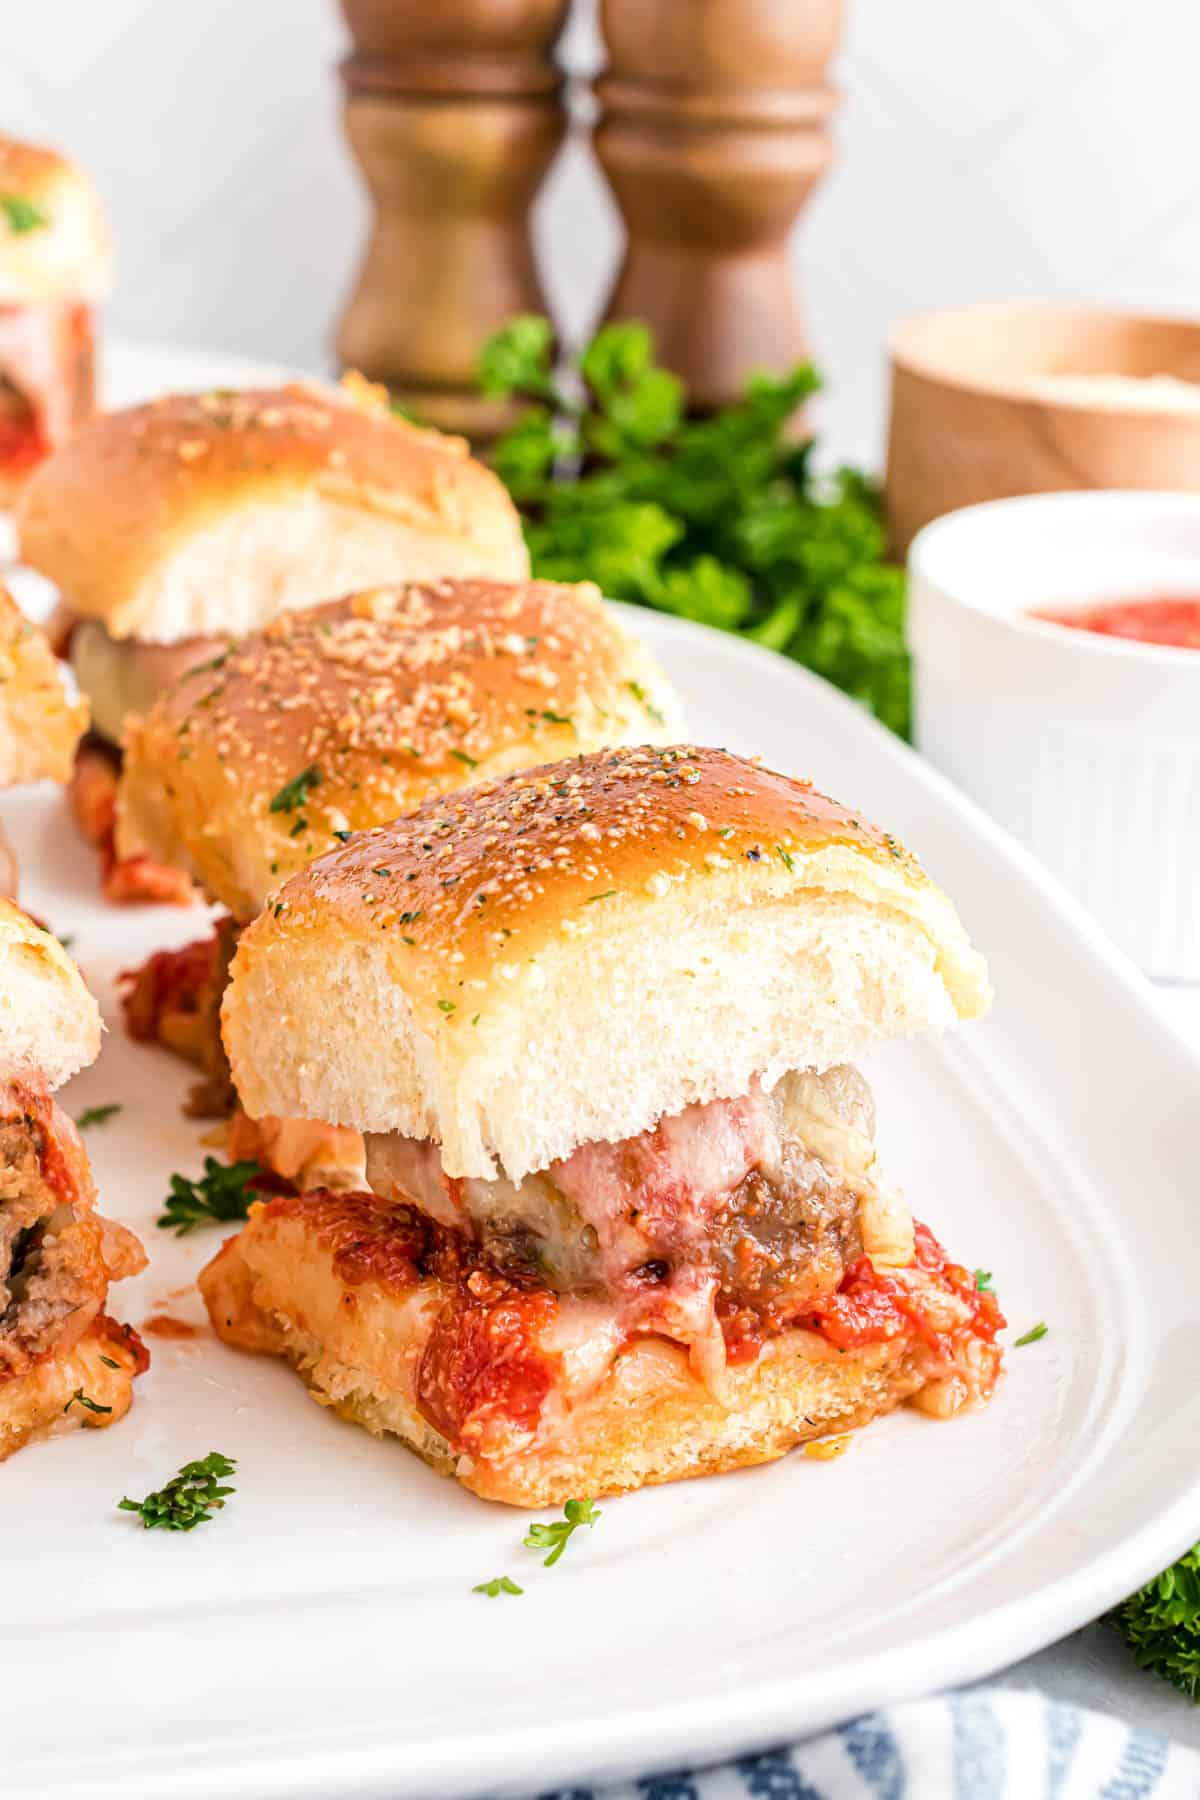 Meatball sliders on a white plate.